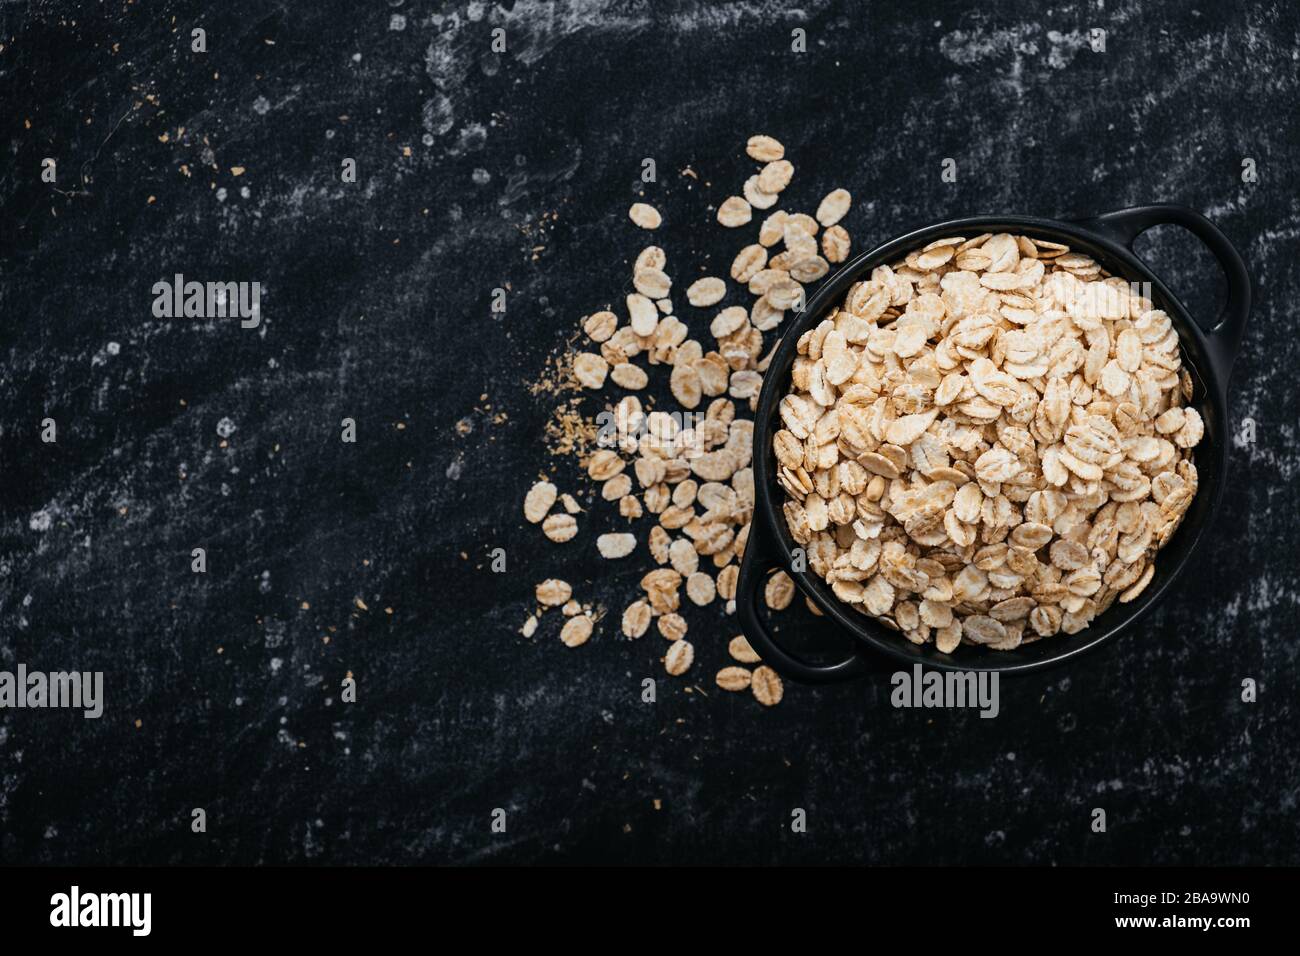 Top view of a black bowl with oat flakes on a black background. healthy food concept. The image has a space to place texts or logos Stock Photo